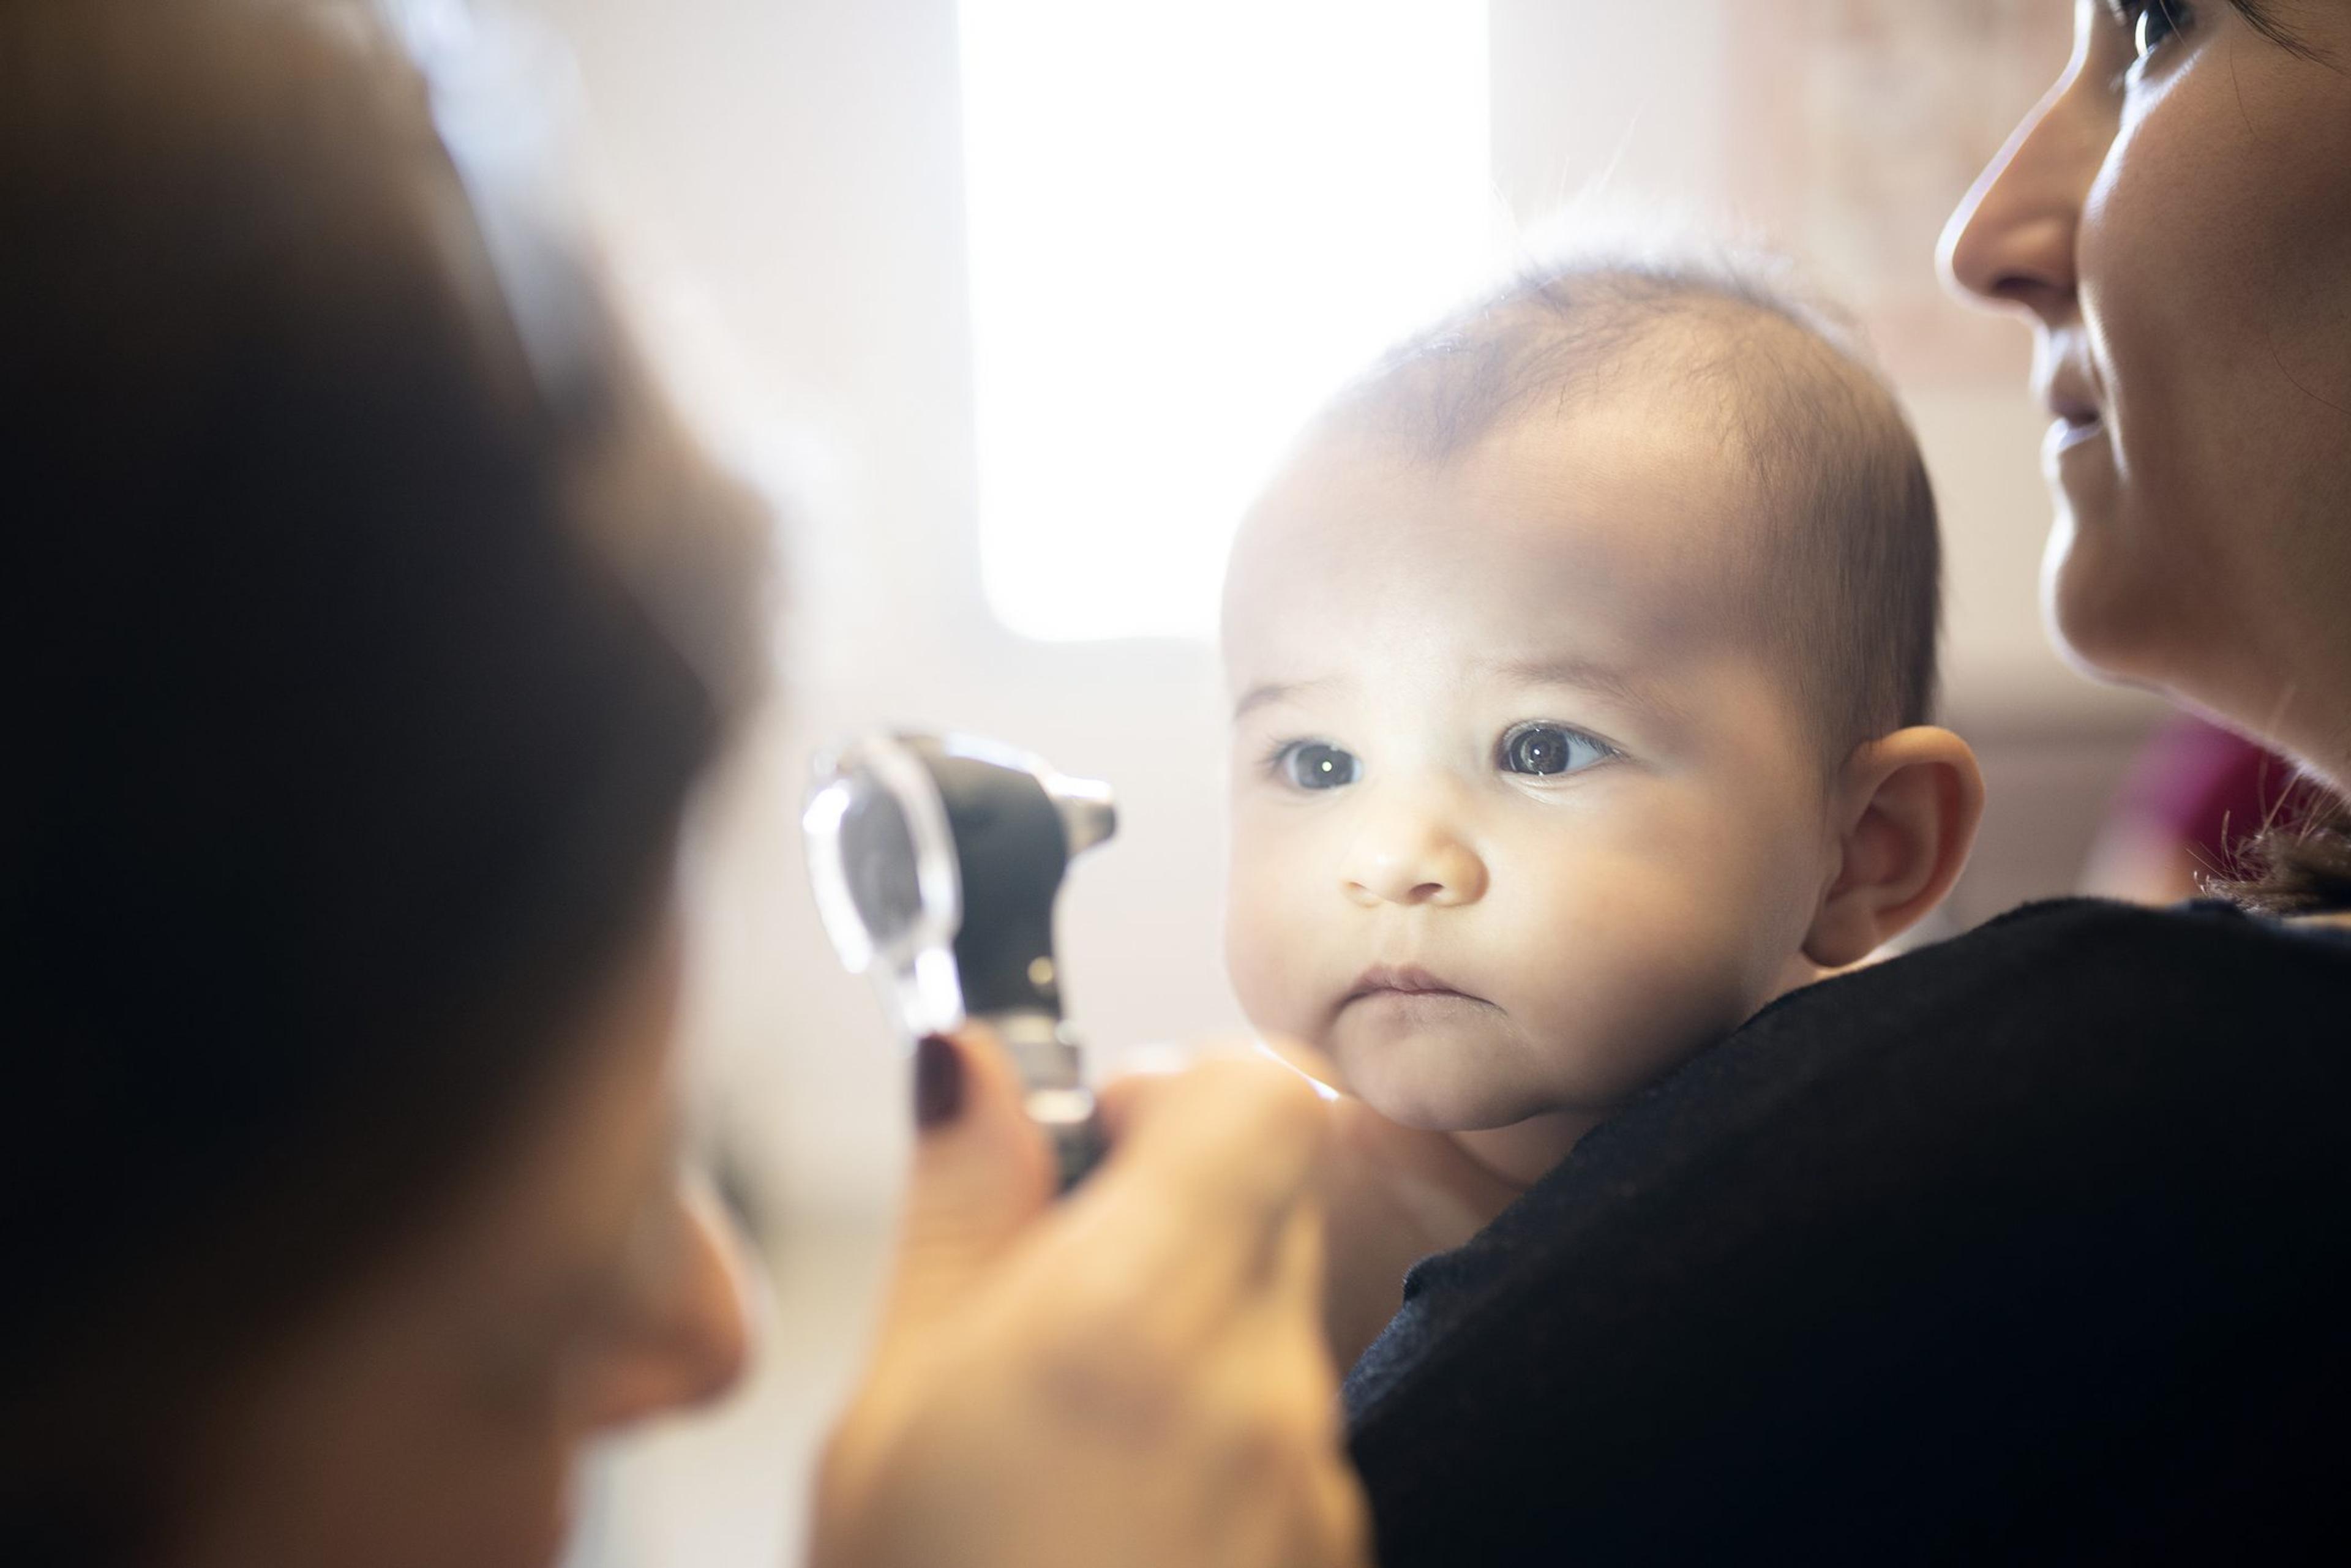 Doctor examines young child for early signs of an eye problem